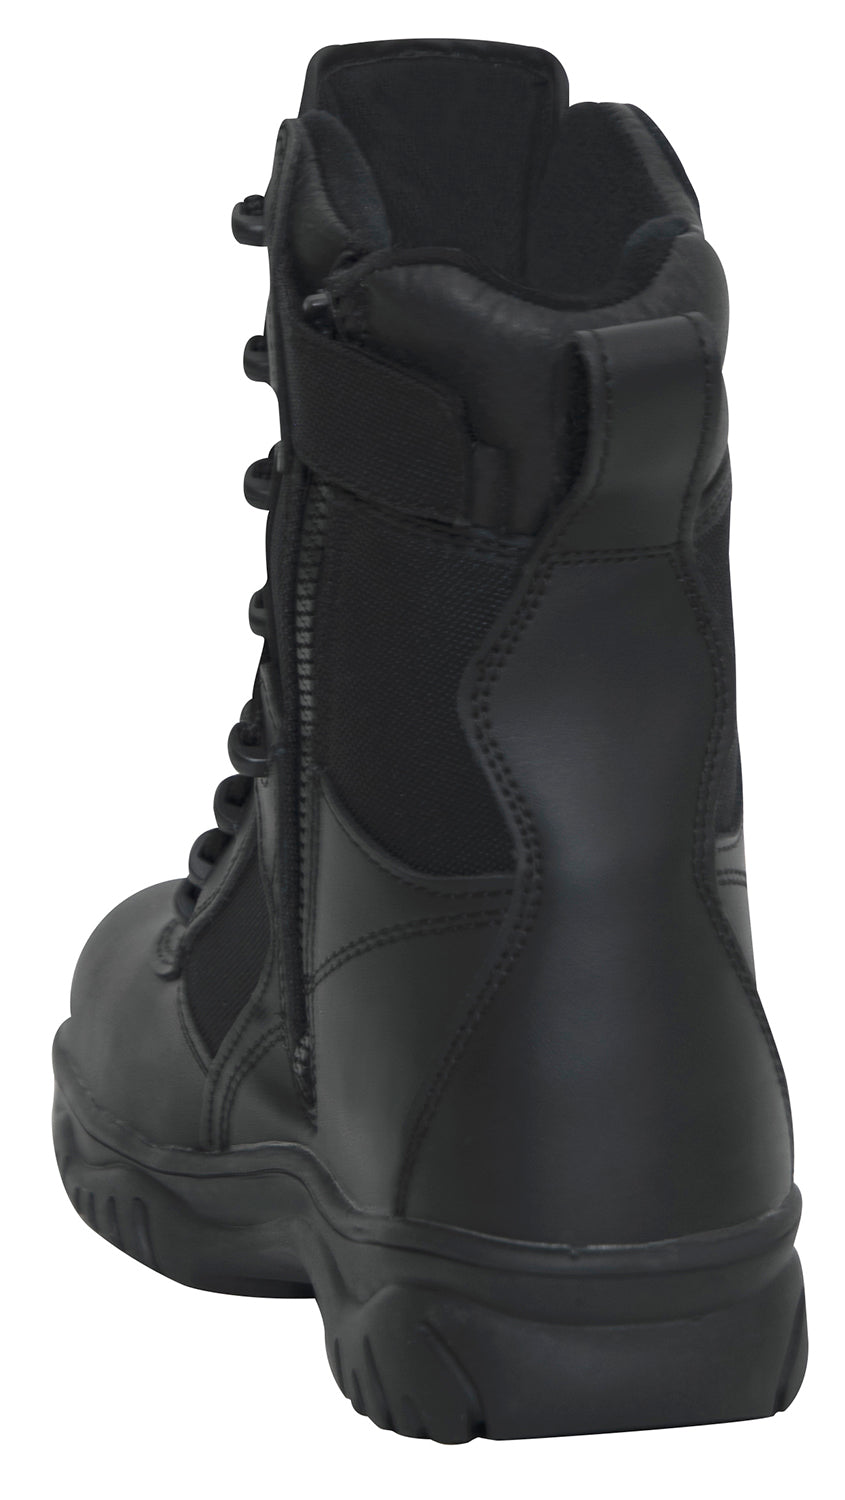 [Zipper] Forced Entry Composite Toe Tactical Boots